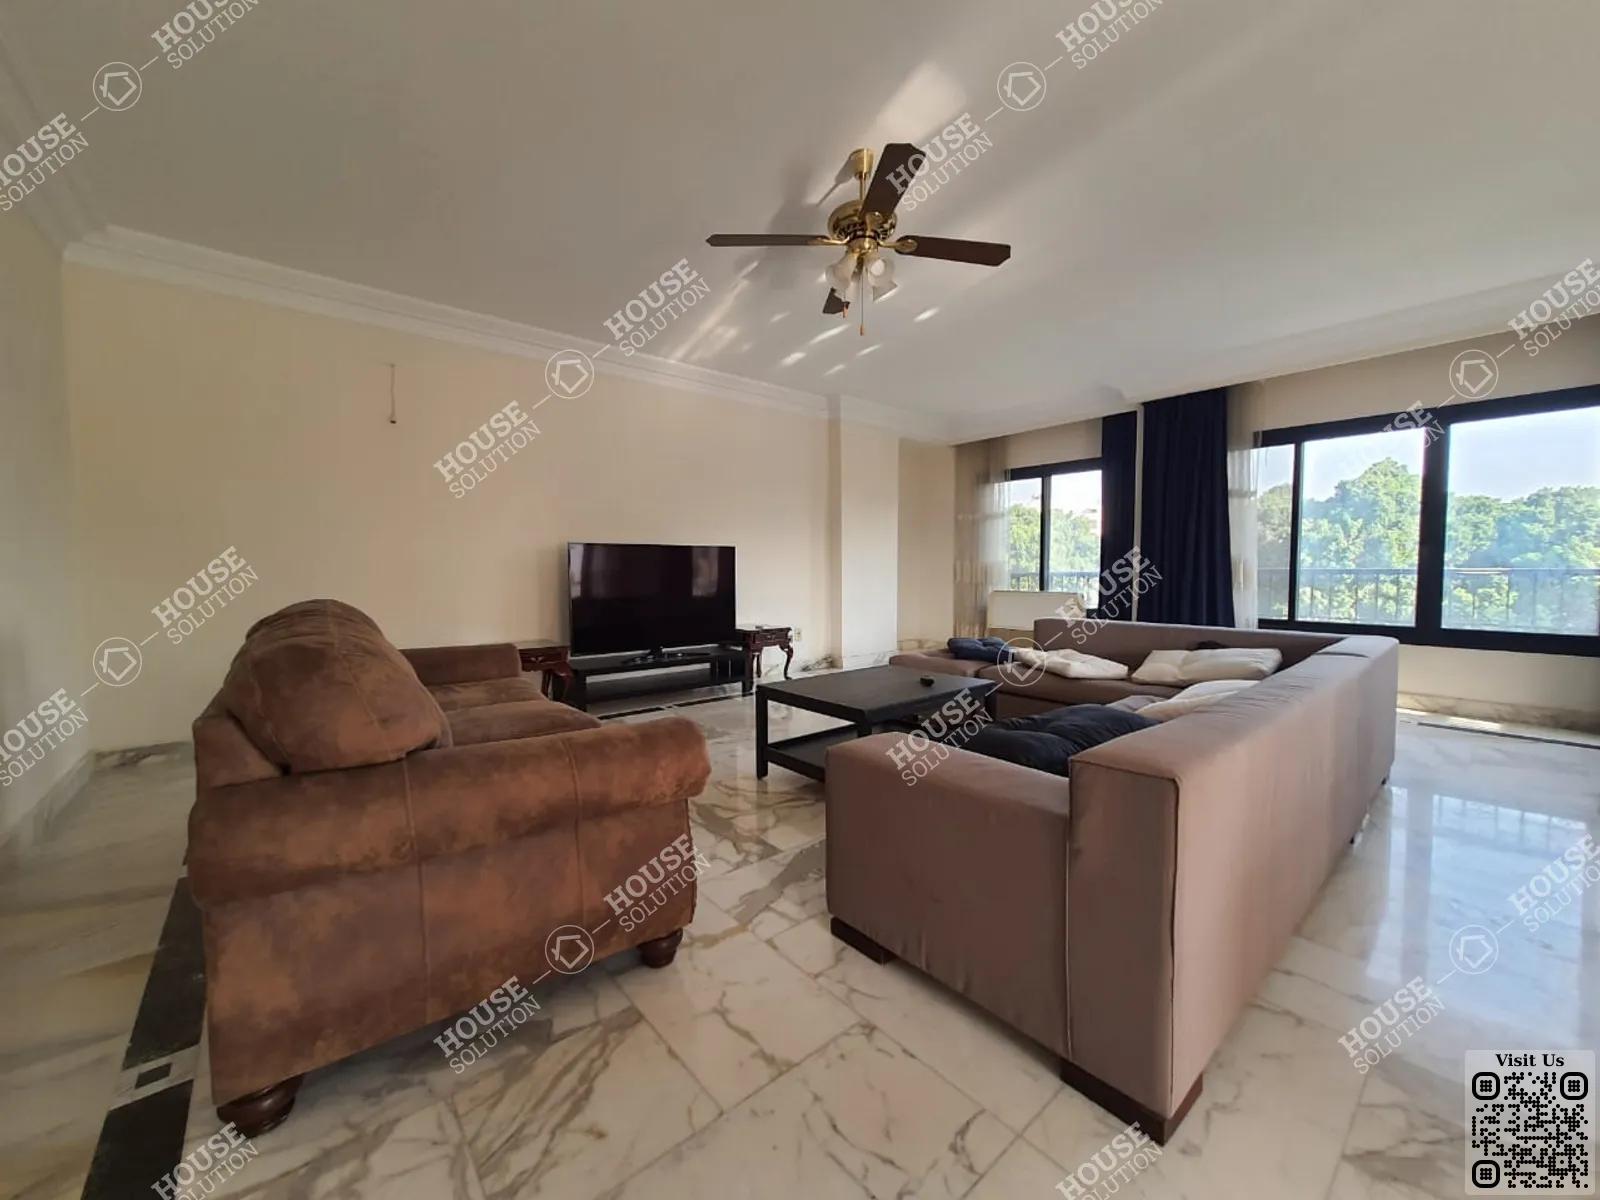 RECEPTION  @ Apartments For Rent In Maadi Maadi Degla Area: 350 m² consists of 4 Bedrooms 4 Bathrooms Modern furnished 5 stars #5455-0